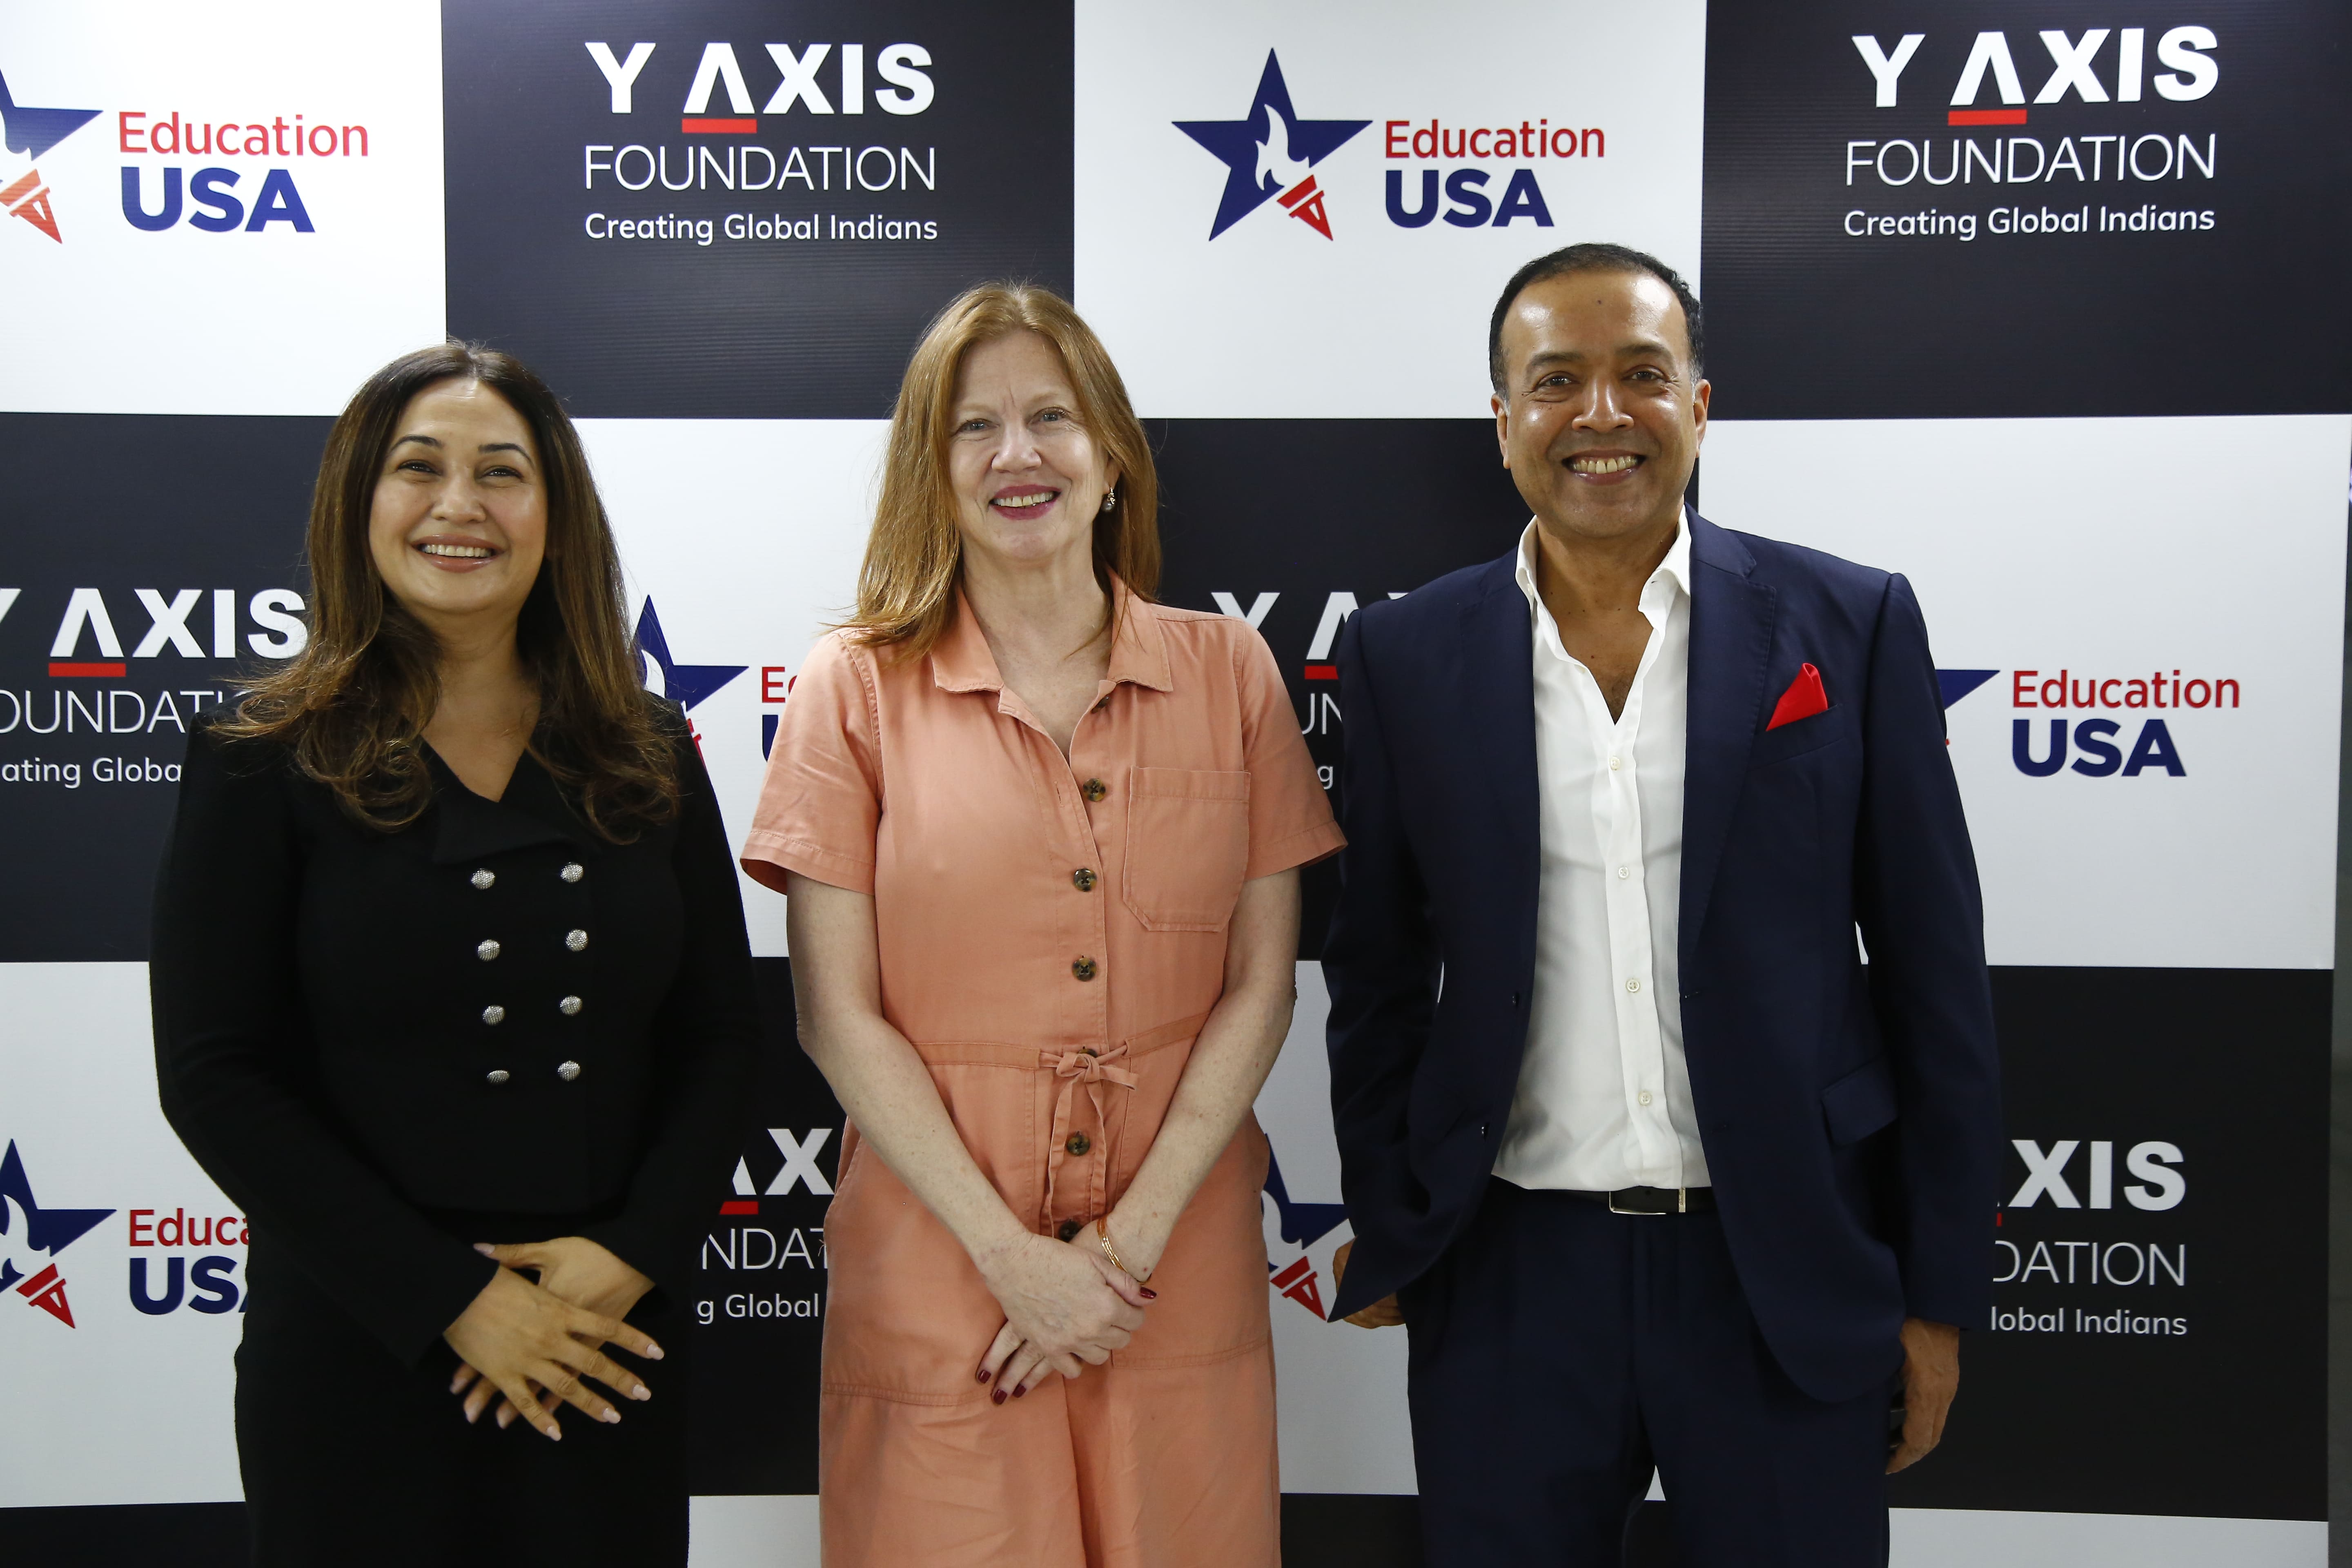 U.S. Consul General Jennifer Larson visited the Education USA Center at the Y-Axis